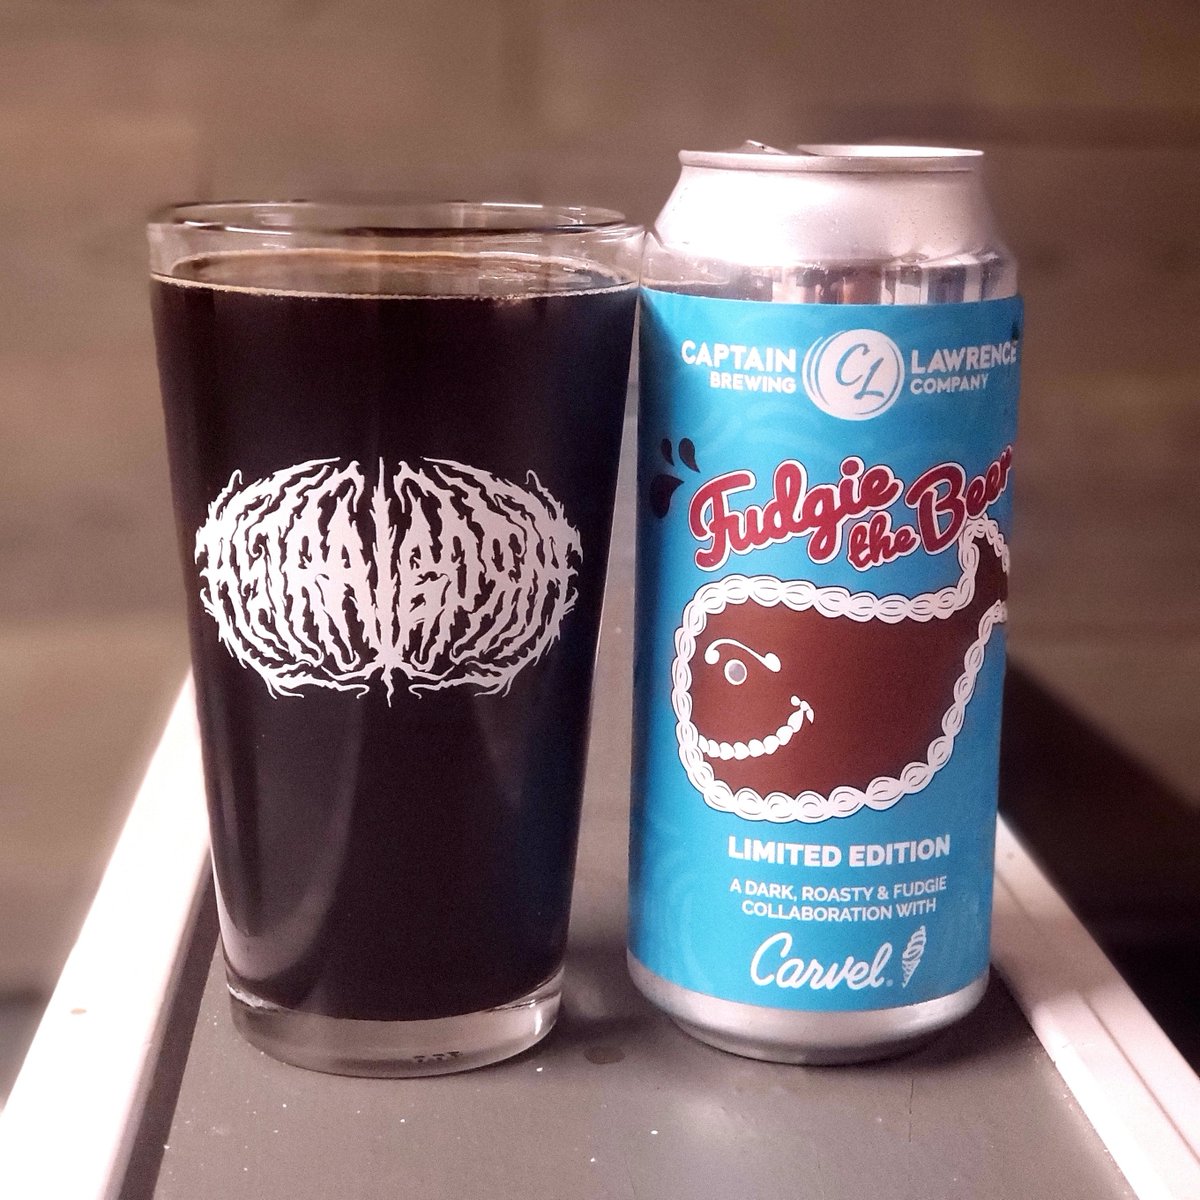 What are you drinkin' tonight? 🍺

Filling our glass is the Fudgie the Beer pastry stout by Captain Lawrence Brewing Company. Cheers!

Grab your Astralborne pint glass here: astralborne.bandcamp.com

#astralborne #beer #astralbeer #craftbeer #nowdrinking